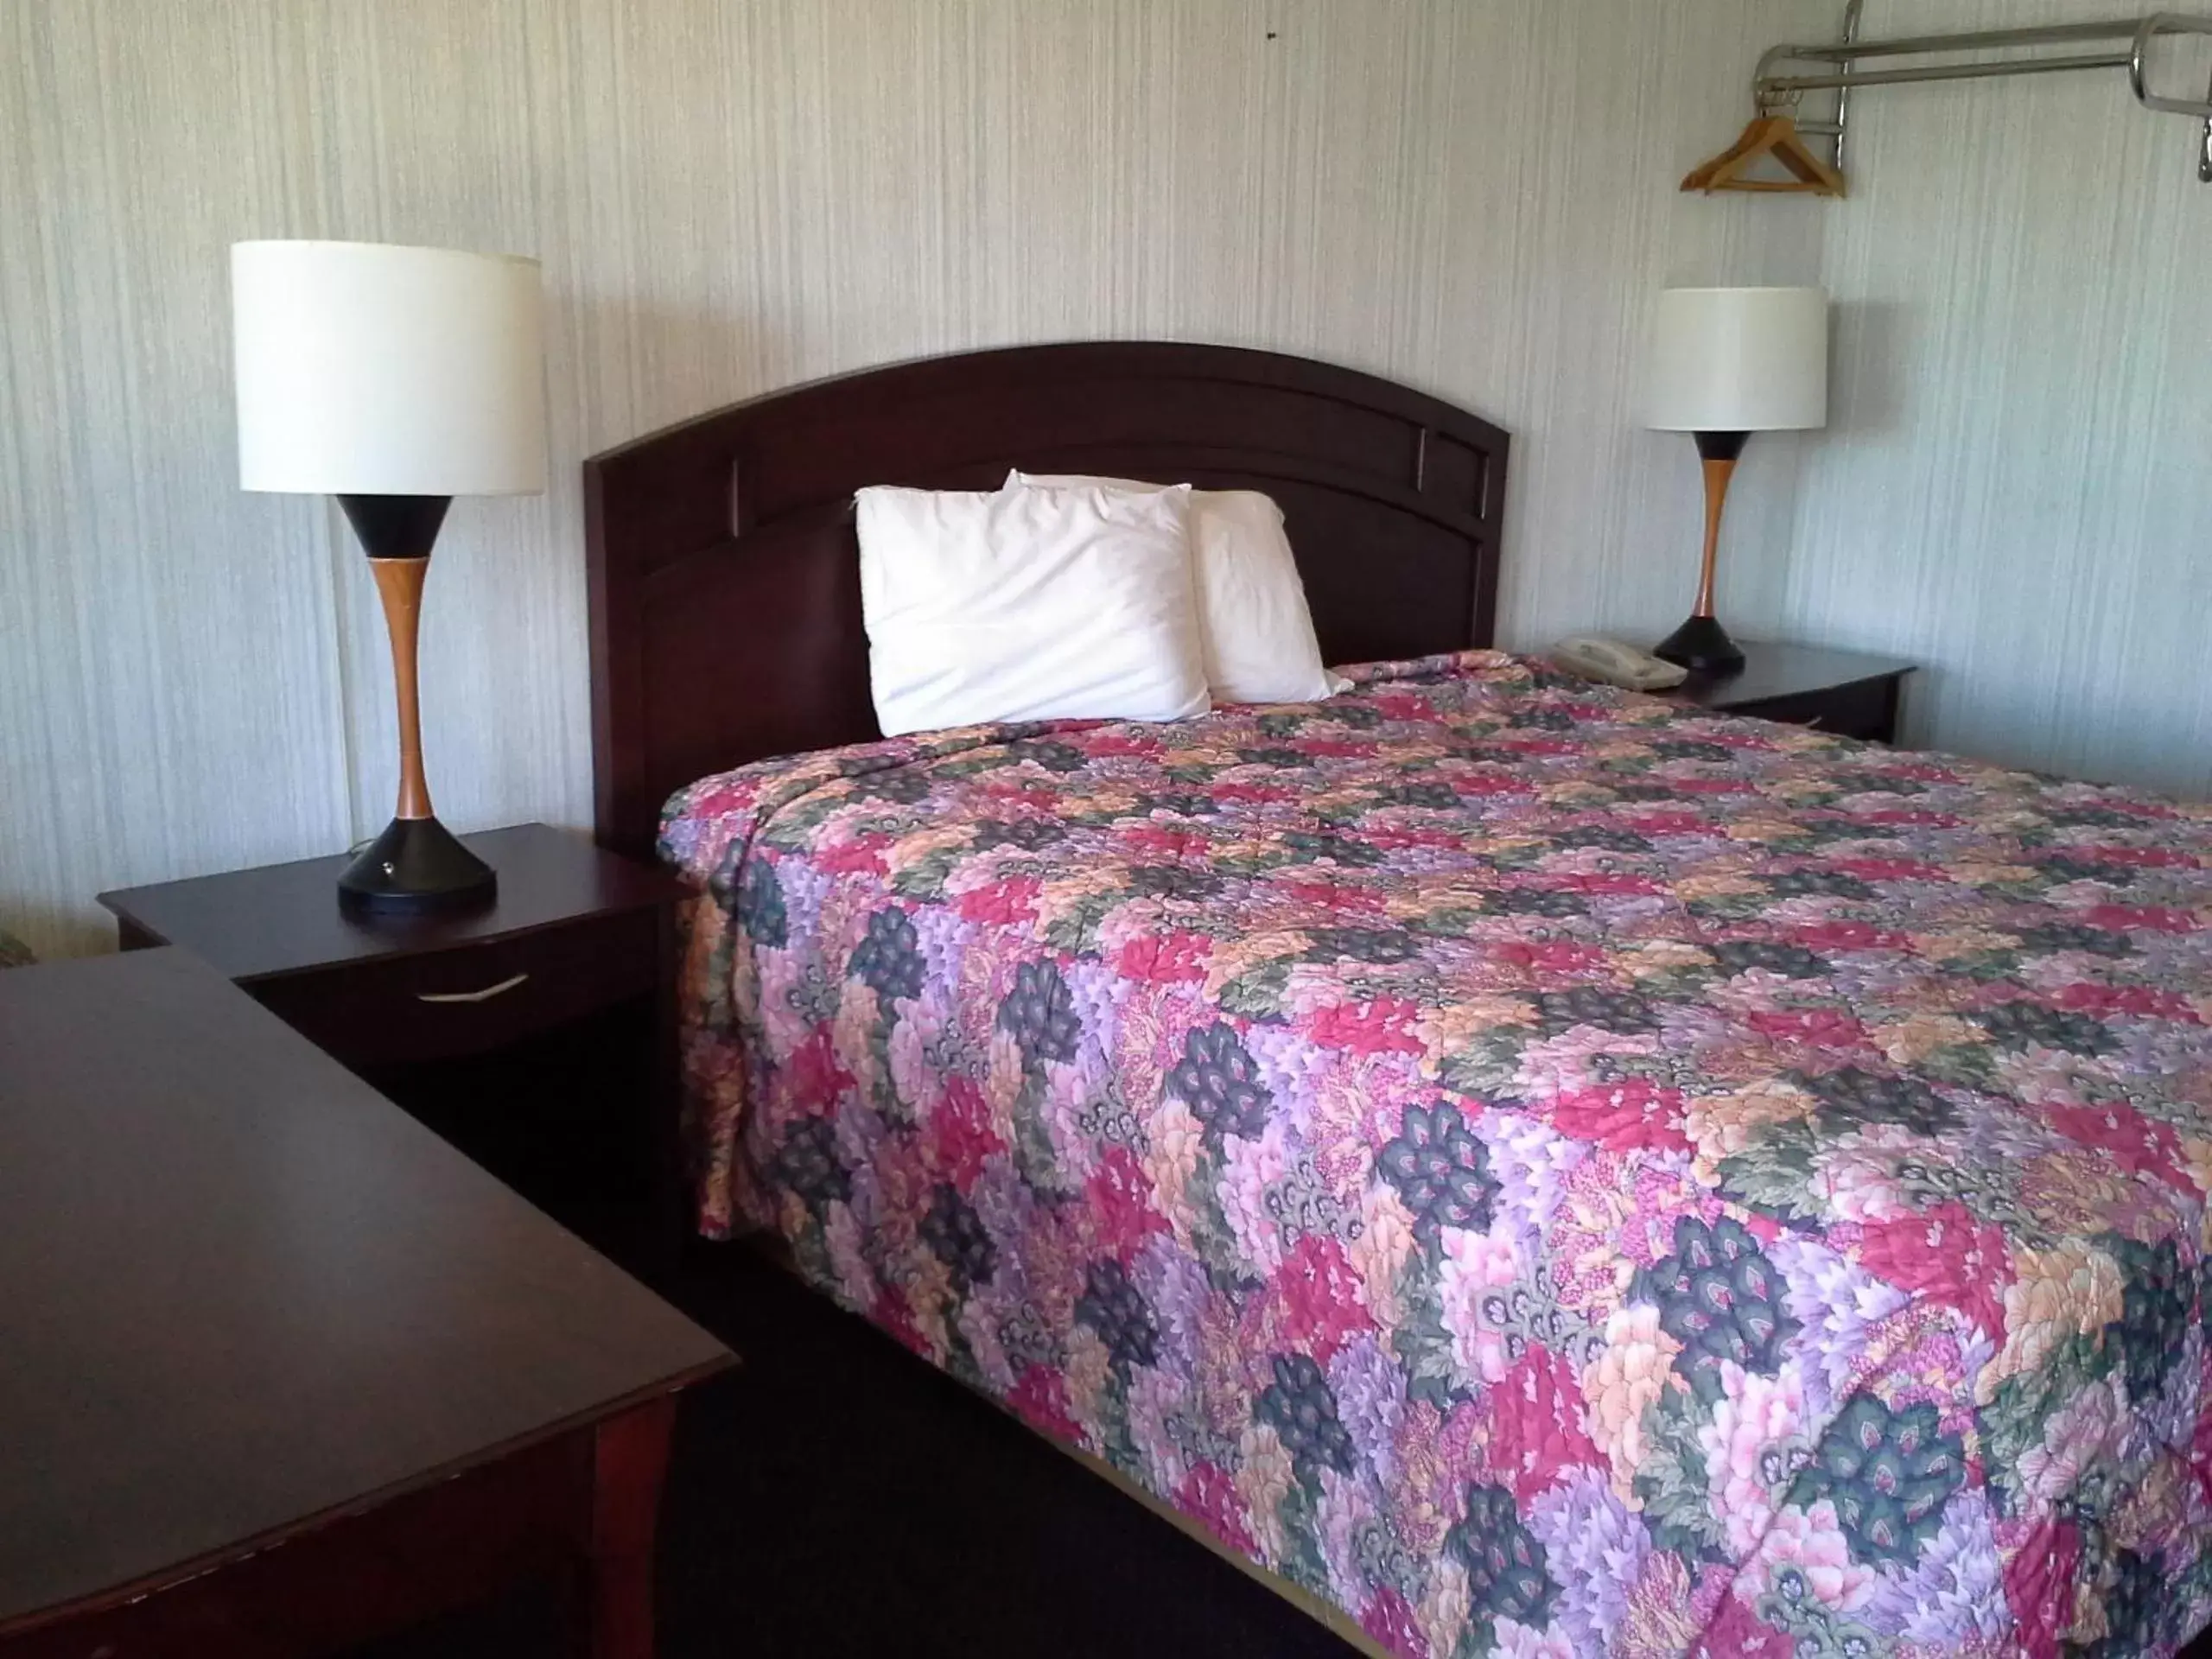 Decorative detail, Bed in Richland Inn and Suites